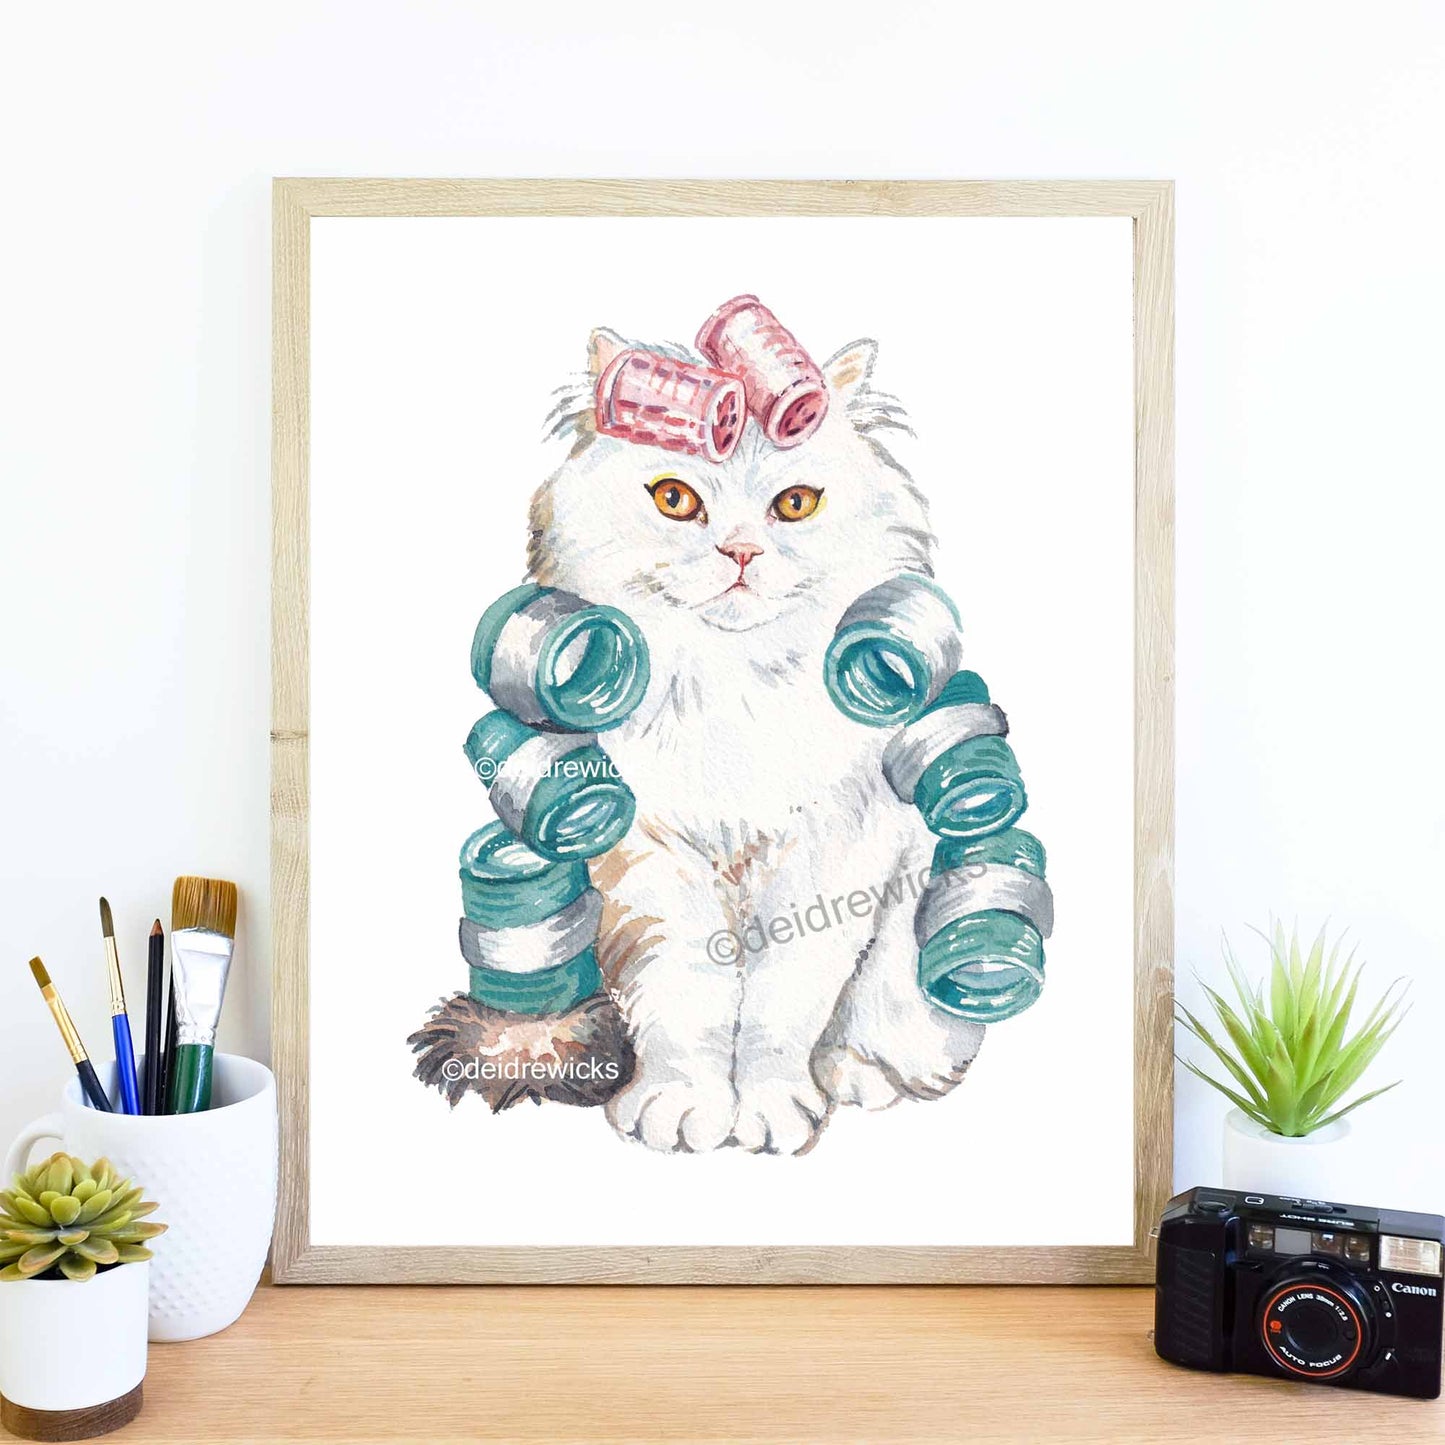 Framed example of a cat watercolour featuring a white Persian cat wearing brightly coloured hair curlers. Art by Deidre Wicks